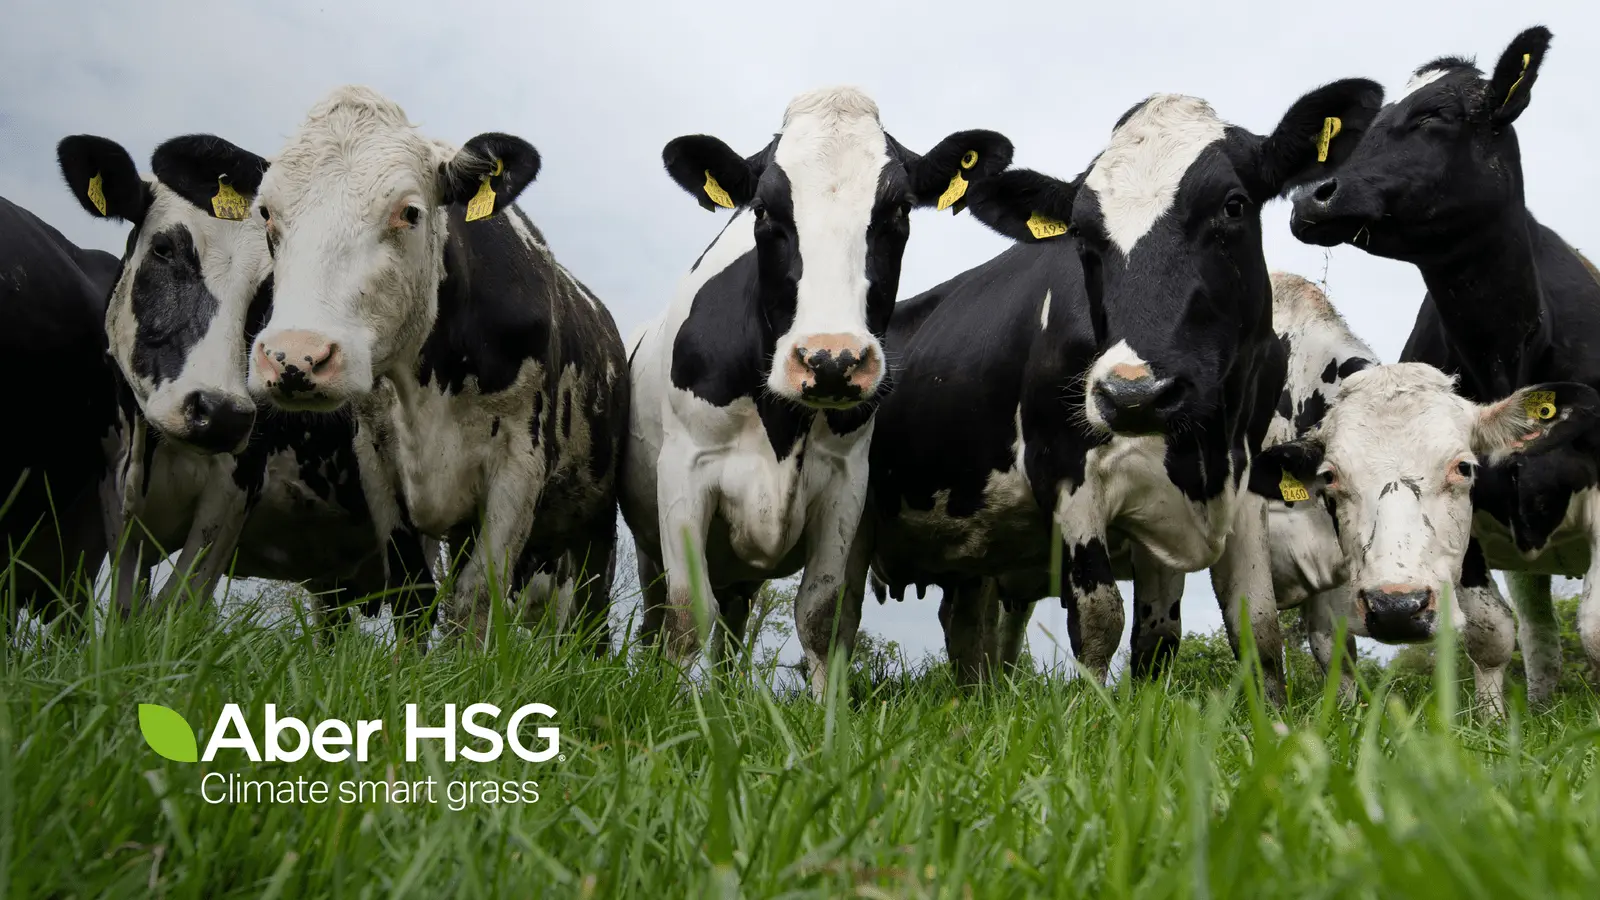 Aber High Sugar Grass from Germinal is ideal for livestock